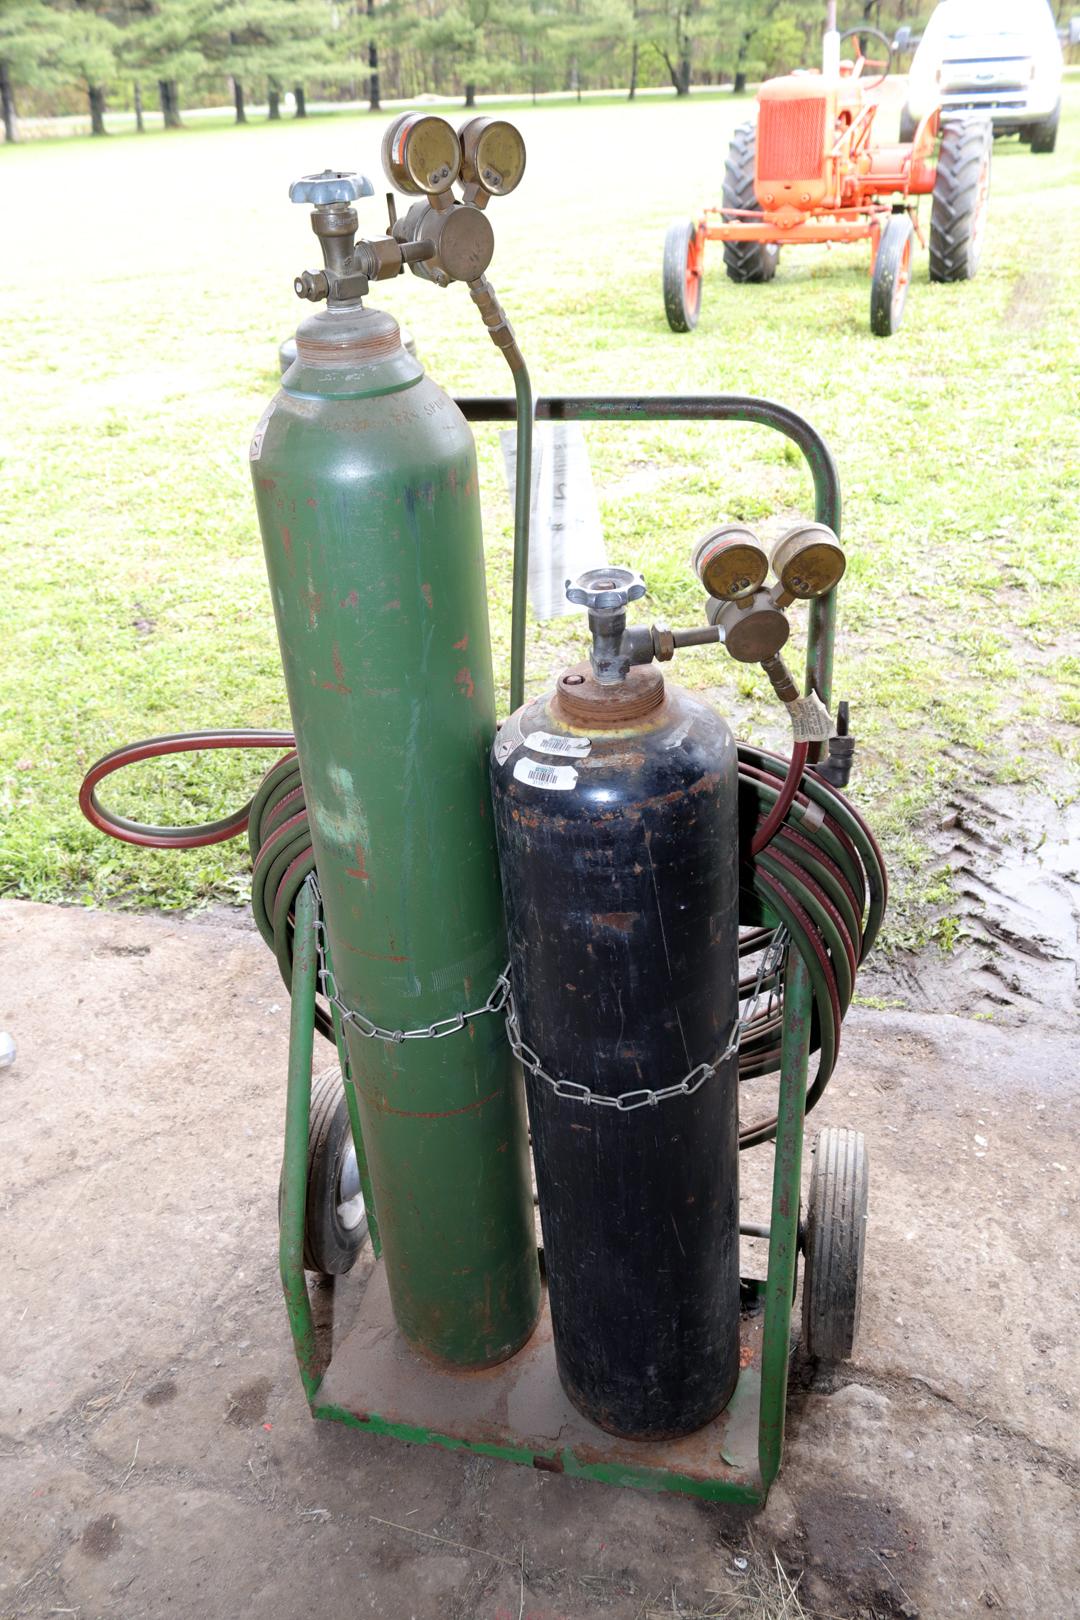 NICE ACETELYNE TORCH SET COMPLETE W/ TANKS, TORCHES, CART AND HOSES